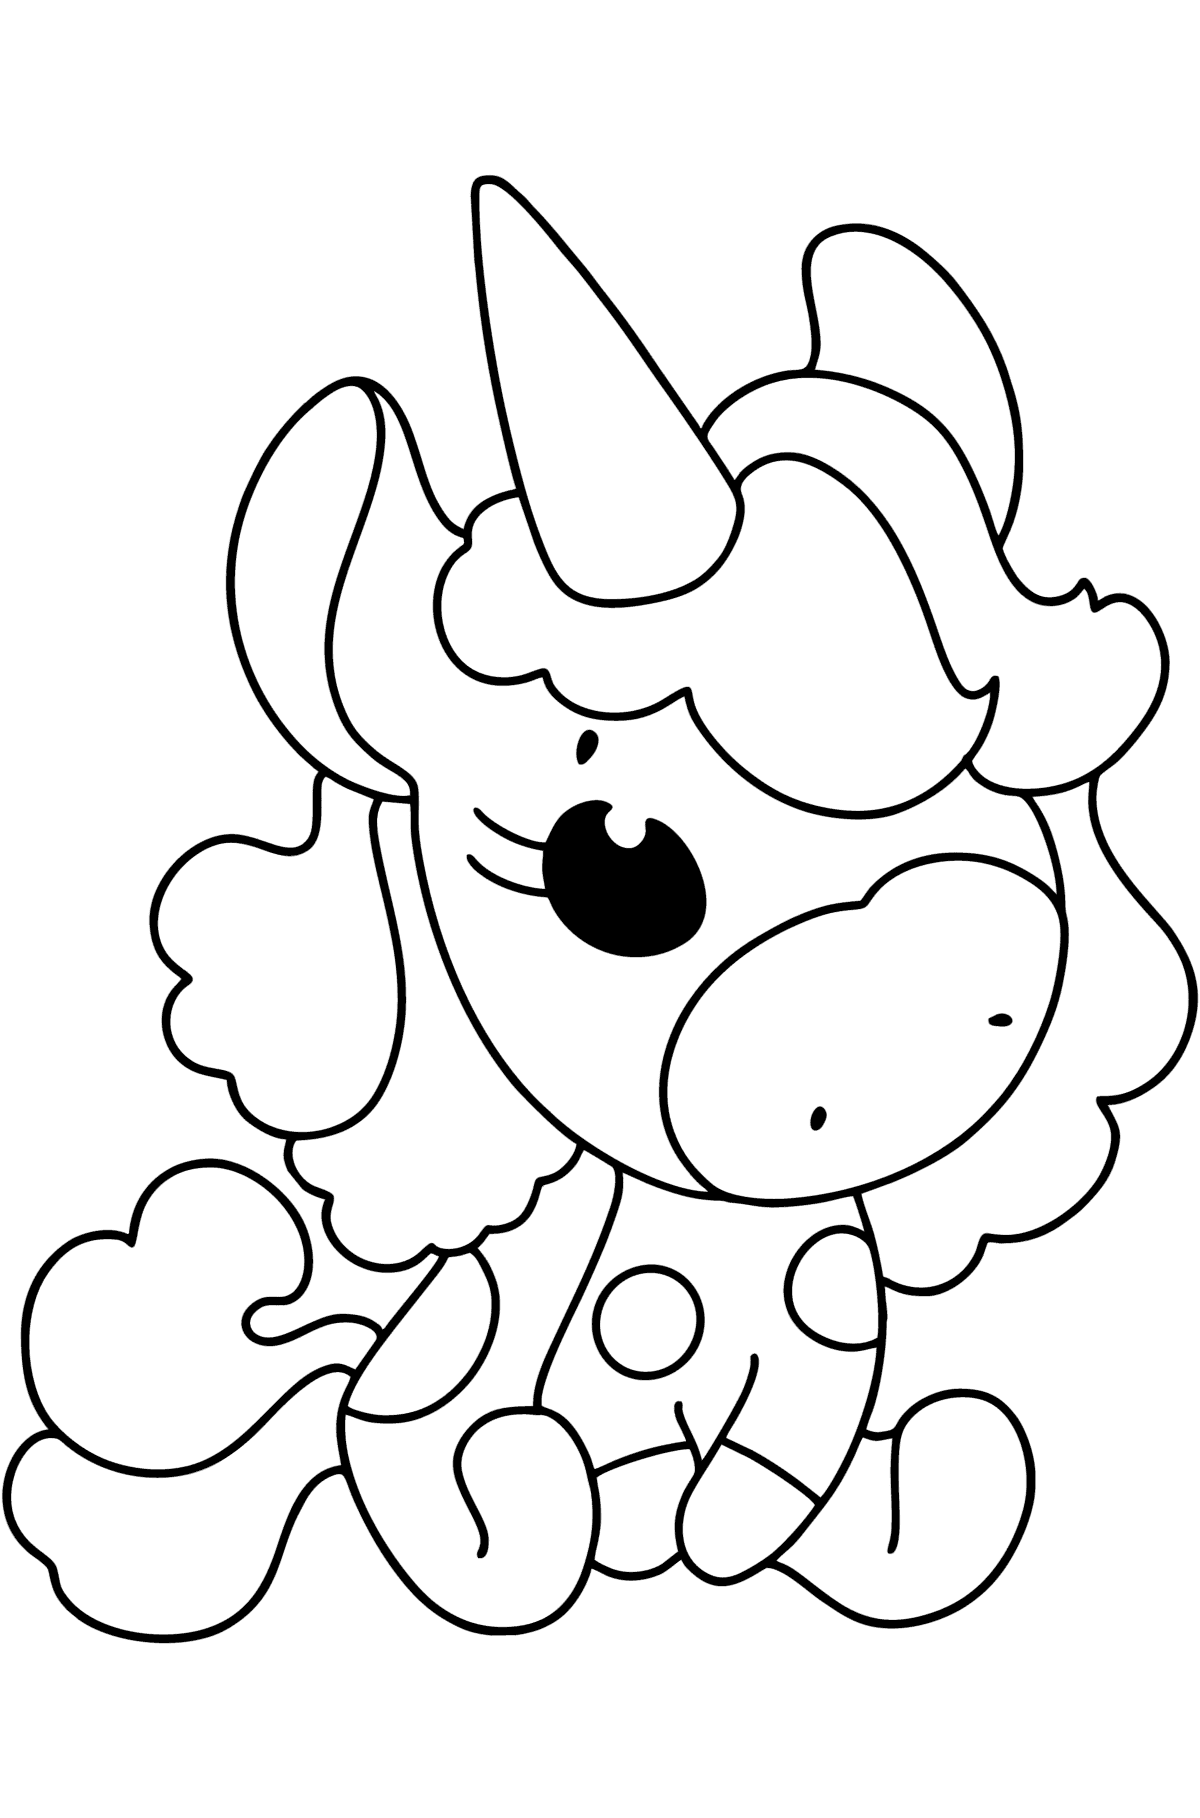 Pink unicorn coloring page - Coloring Pages for Kids